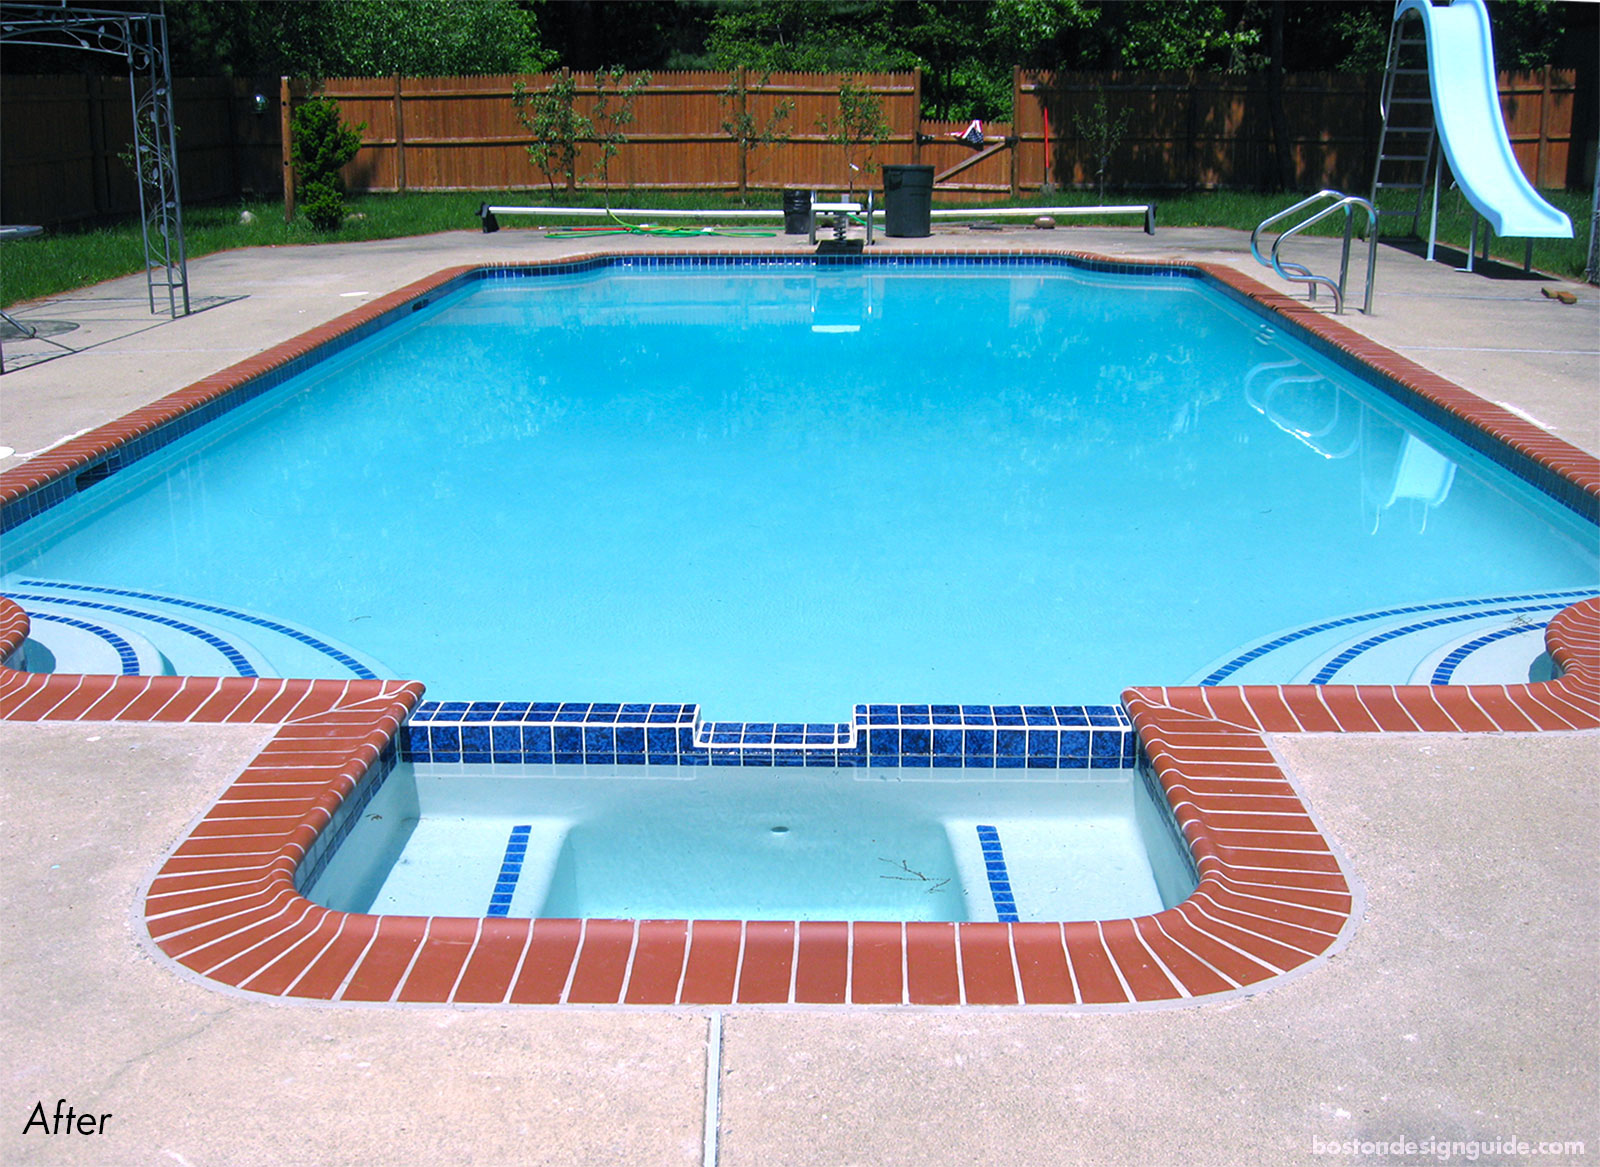 Pool building and restoring